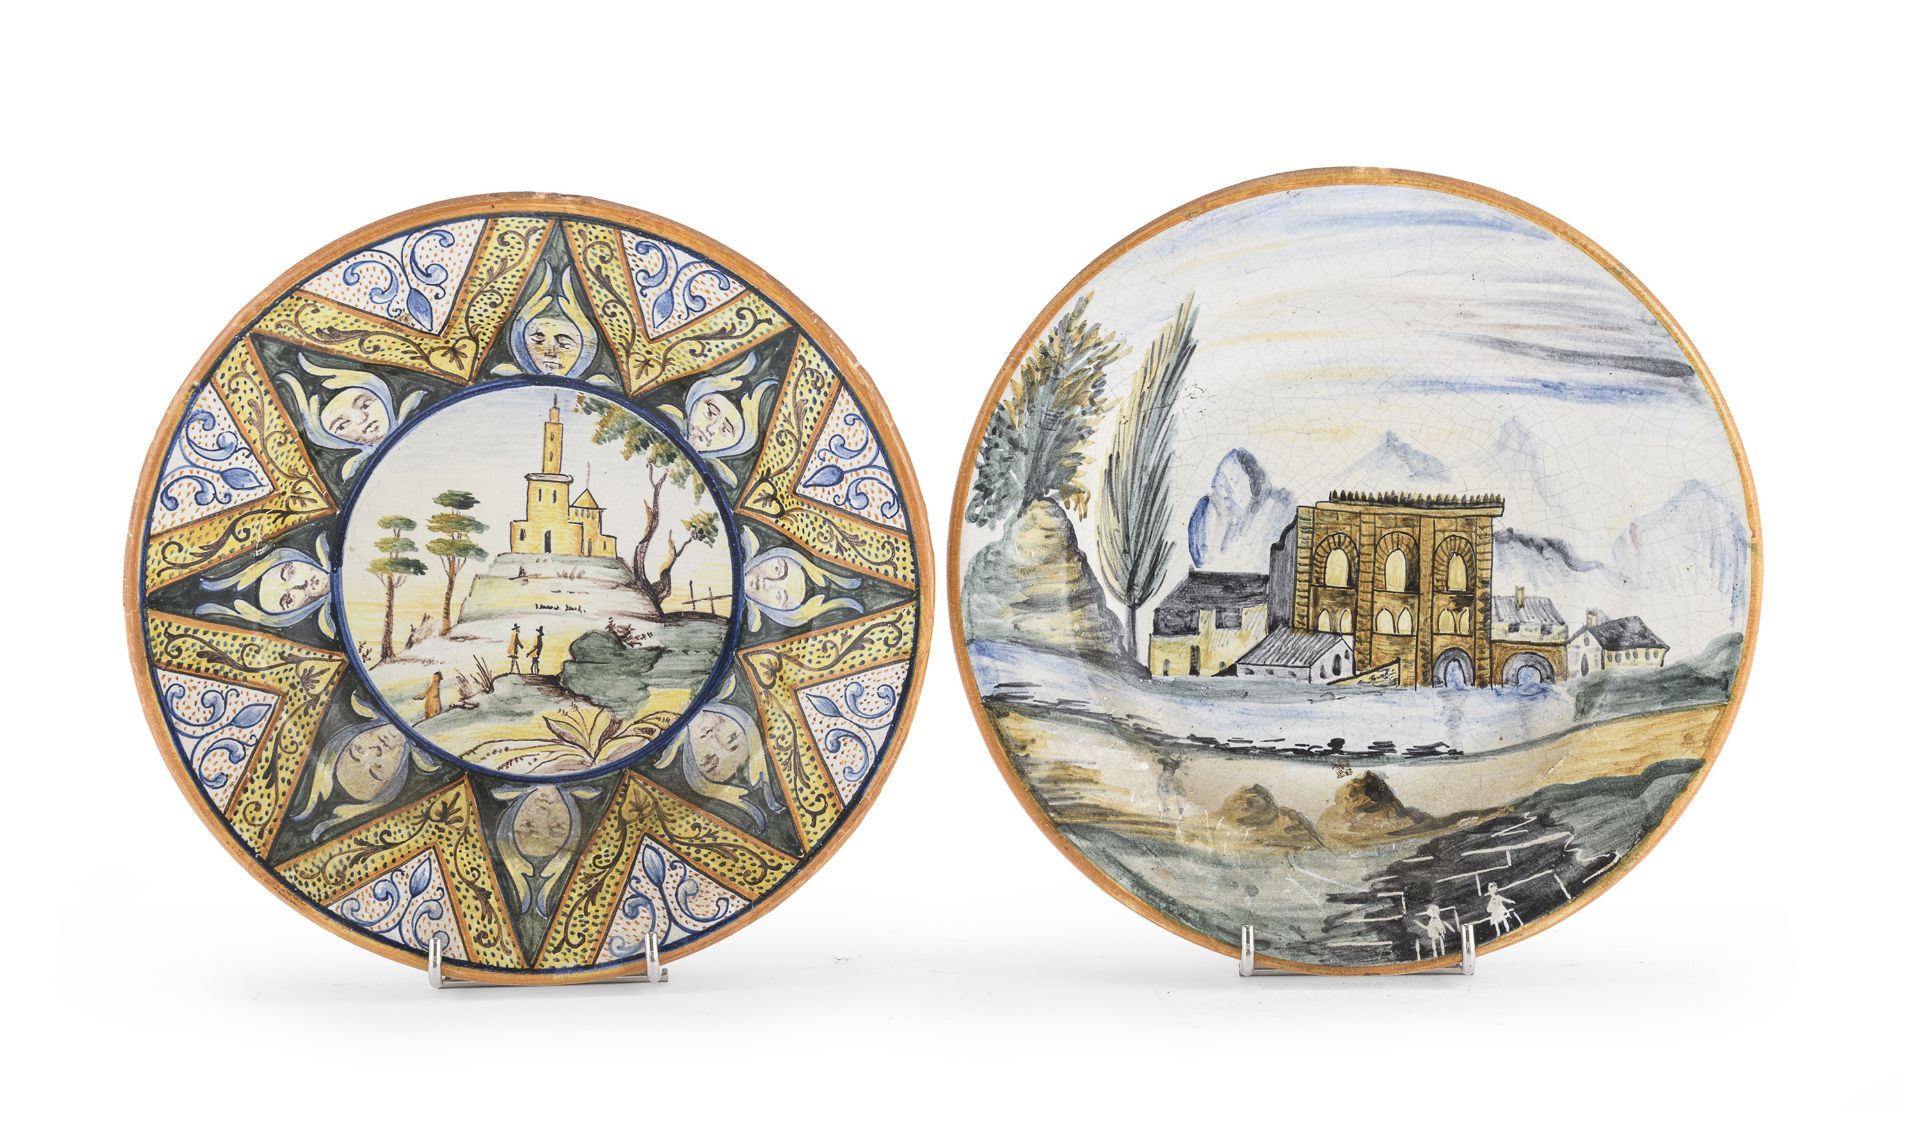 PAIR OF MAJOLICA DISHES ROMAN MANUFACTURE LATE 19TH CENTURY